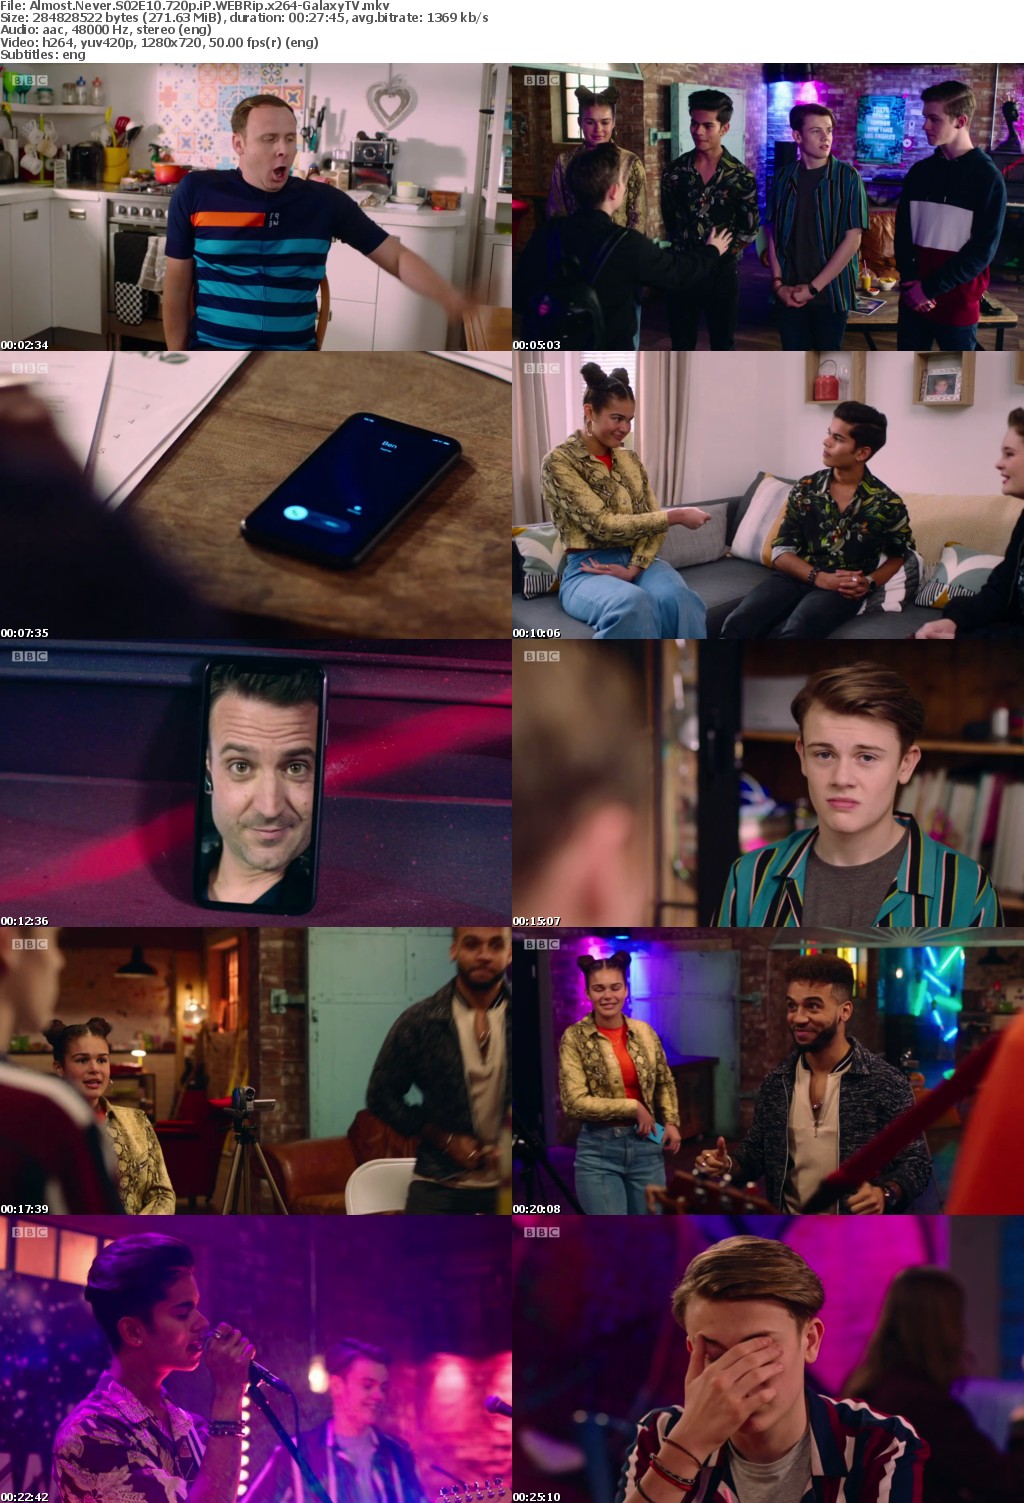 Almost Never S02 COMPLETE 720p iP WEBRip x264-GalaxyTV